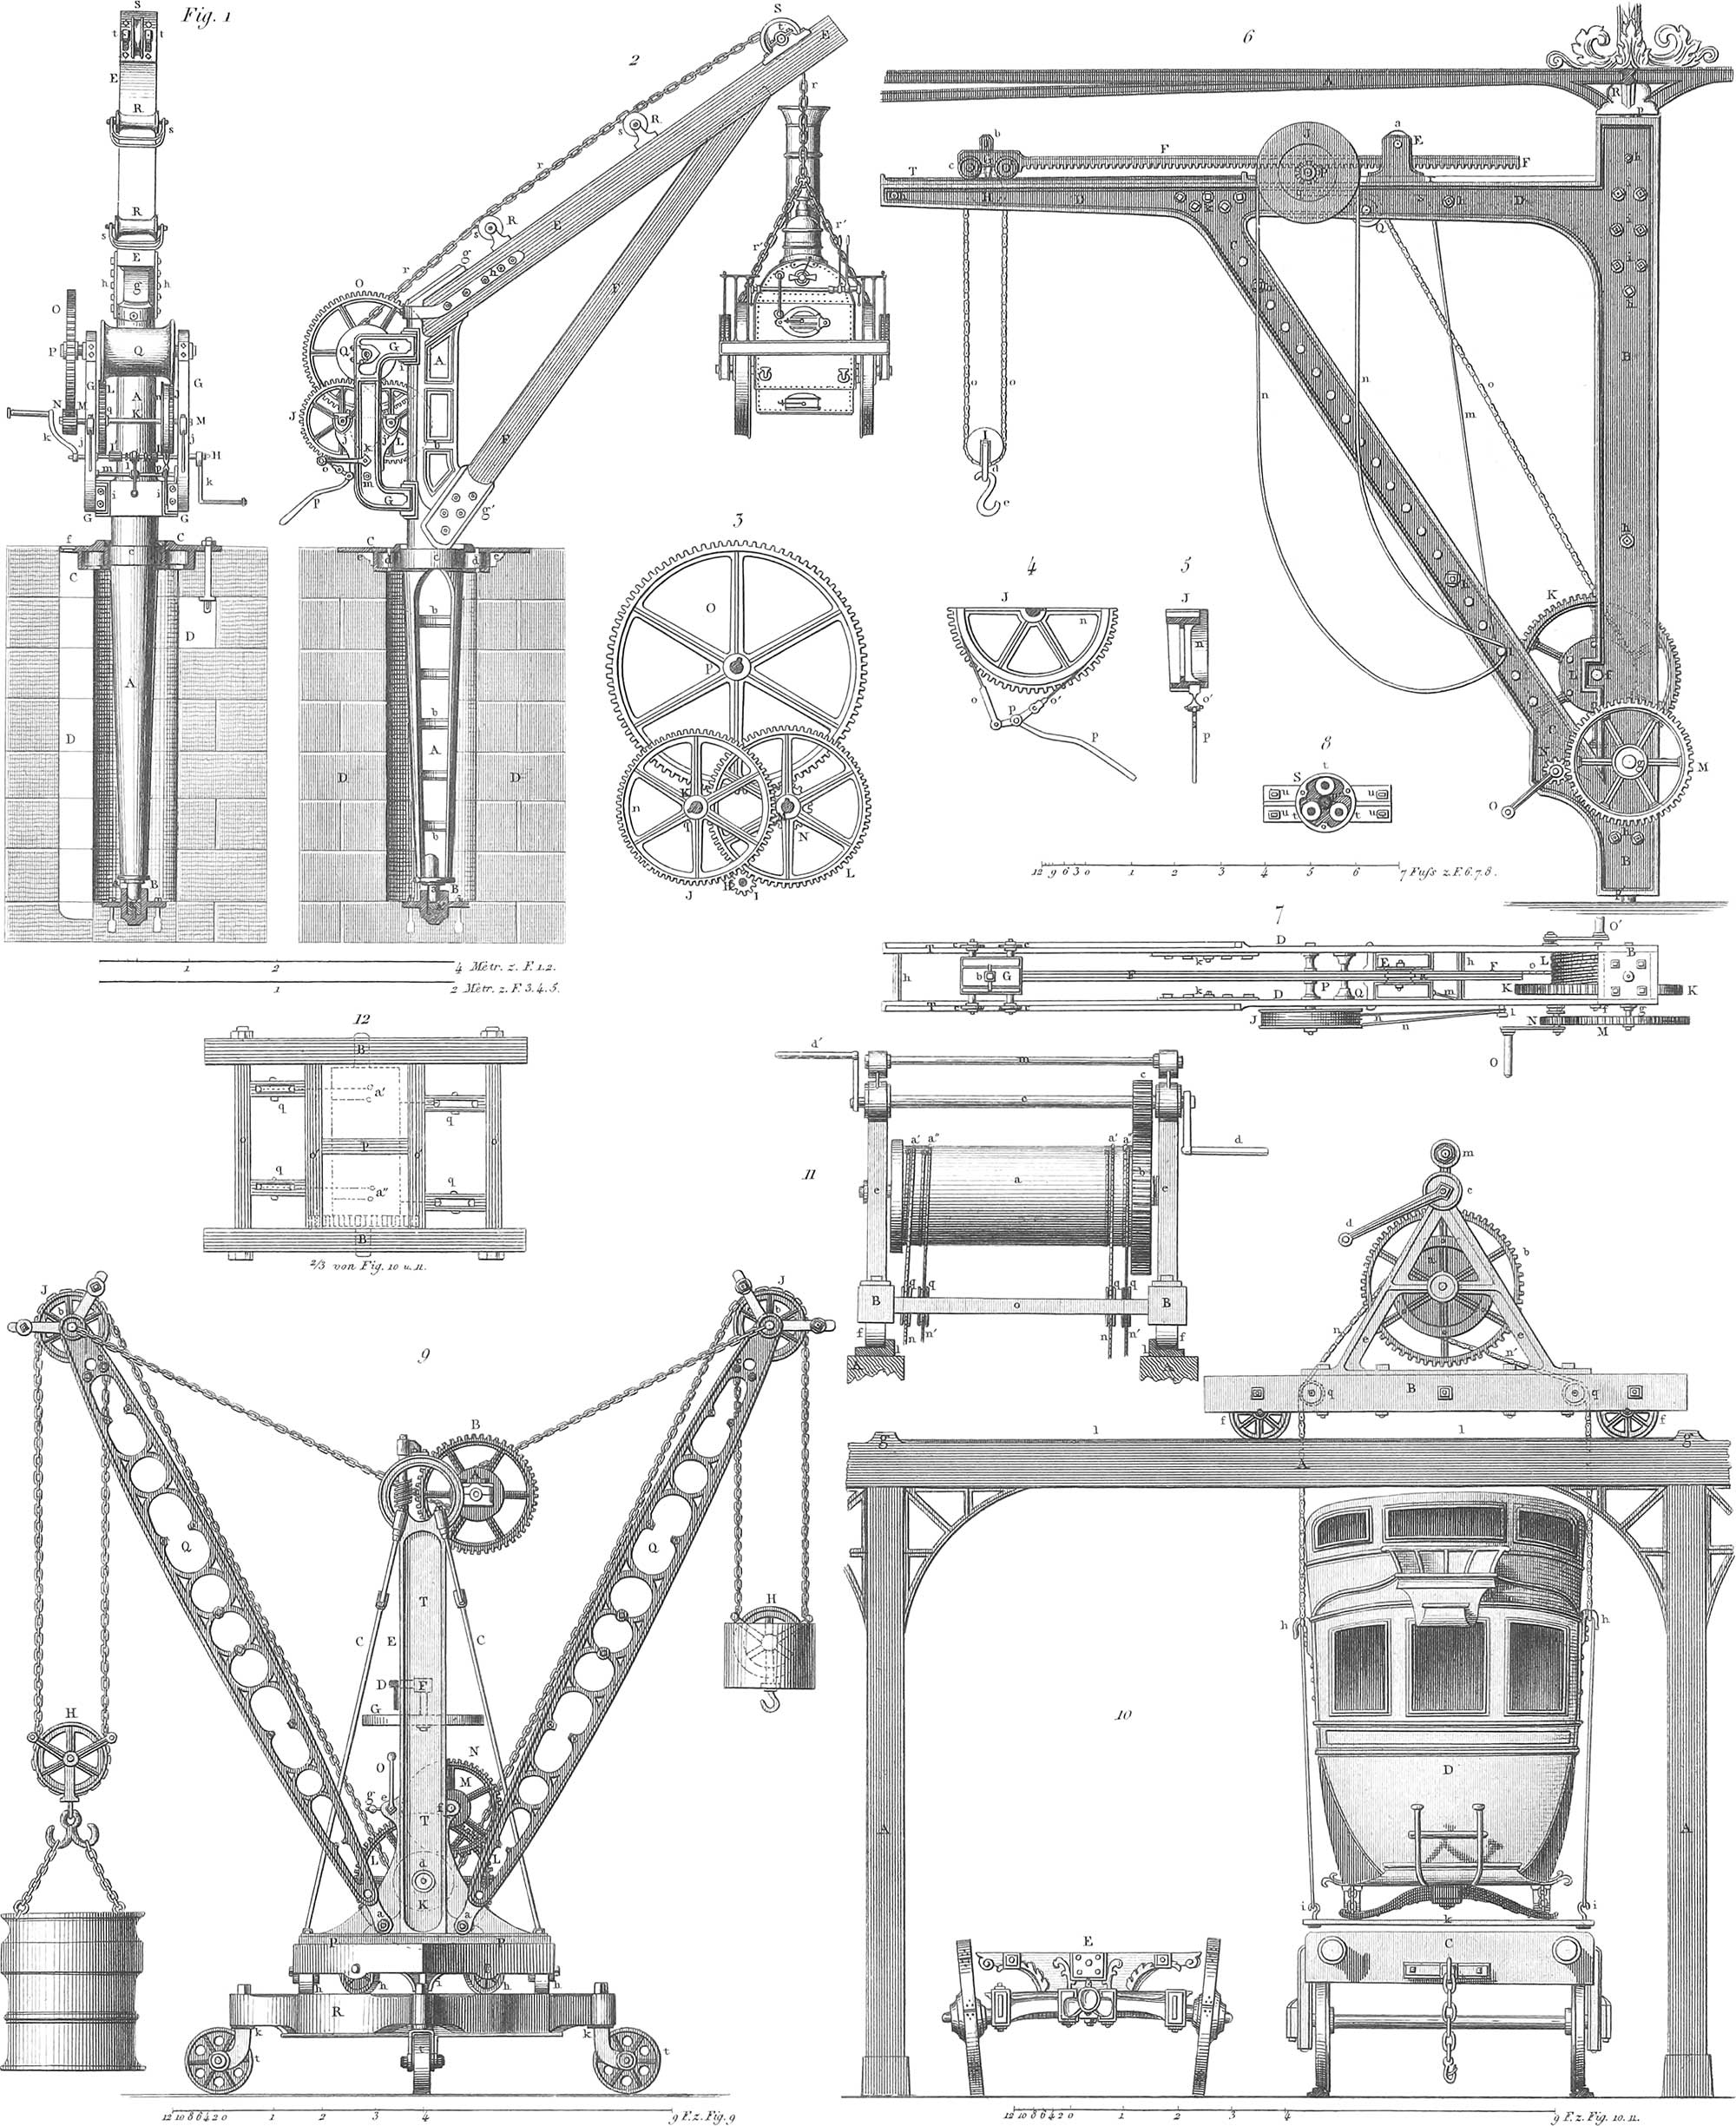 Technology - Iconographic Encyclopædia of Science, Literature, and Art